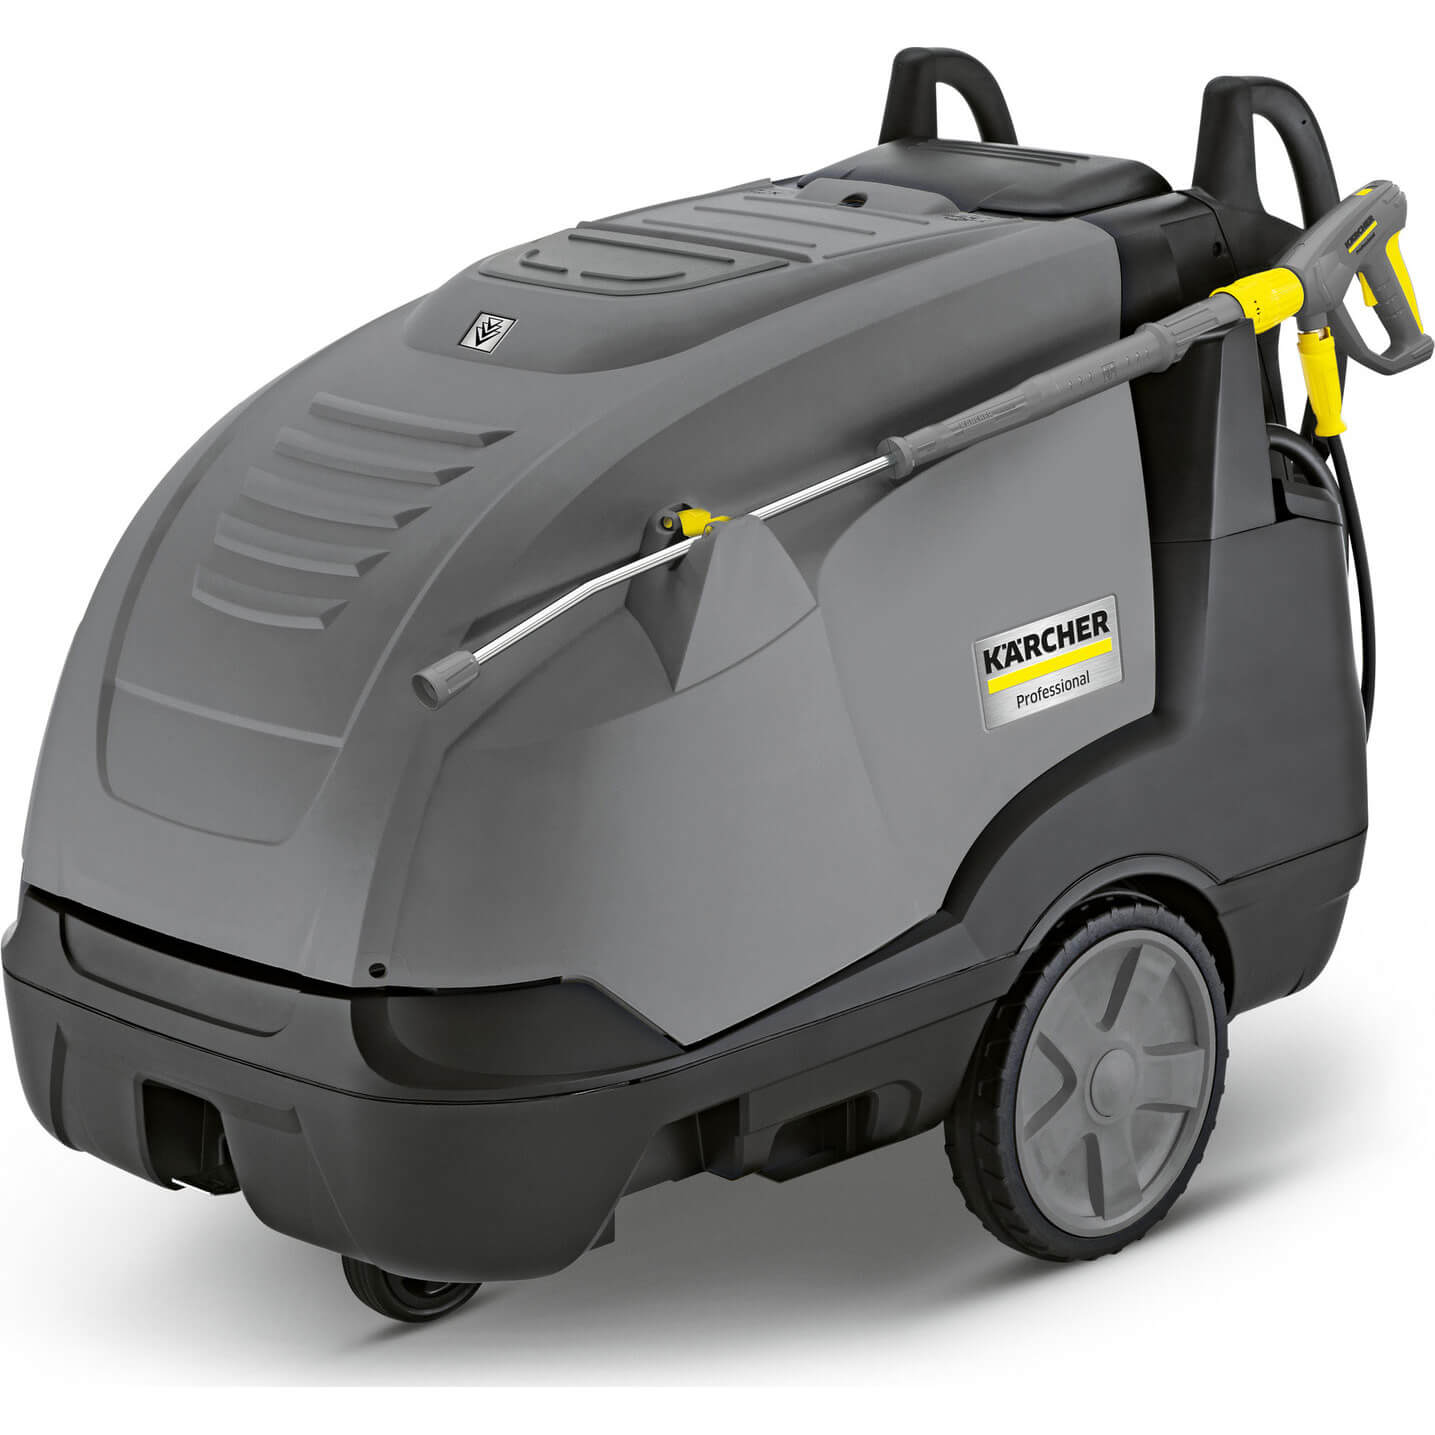 Karcher HDS-E 8/16-4 M 12Kw Professional Hot Water Pressure Washer 160 Bar